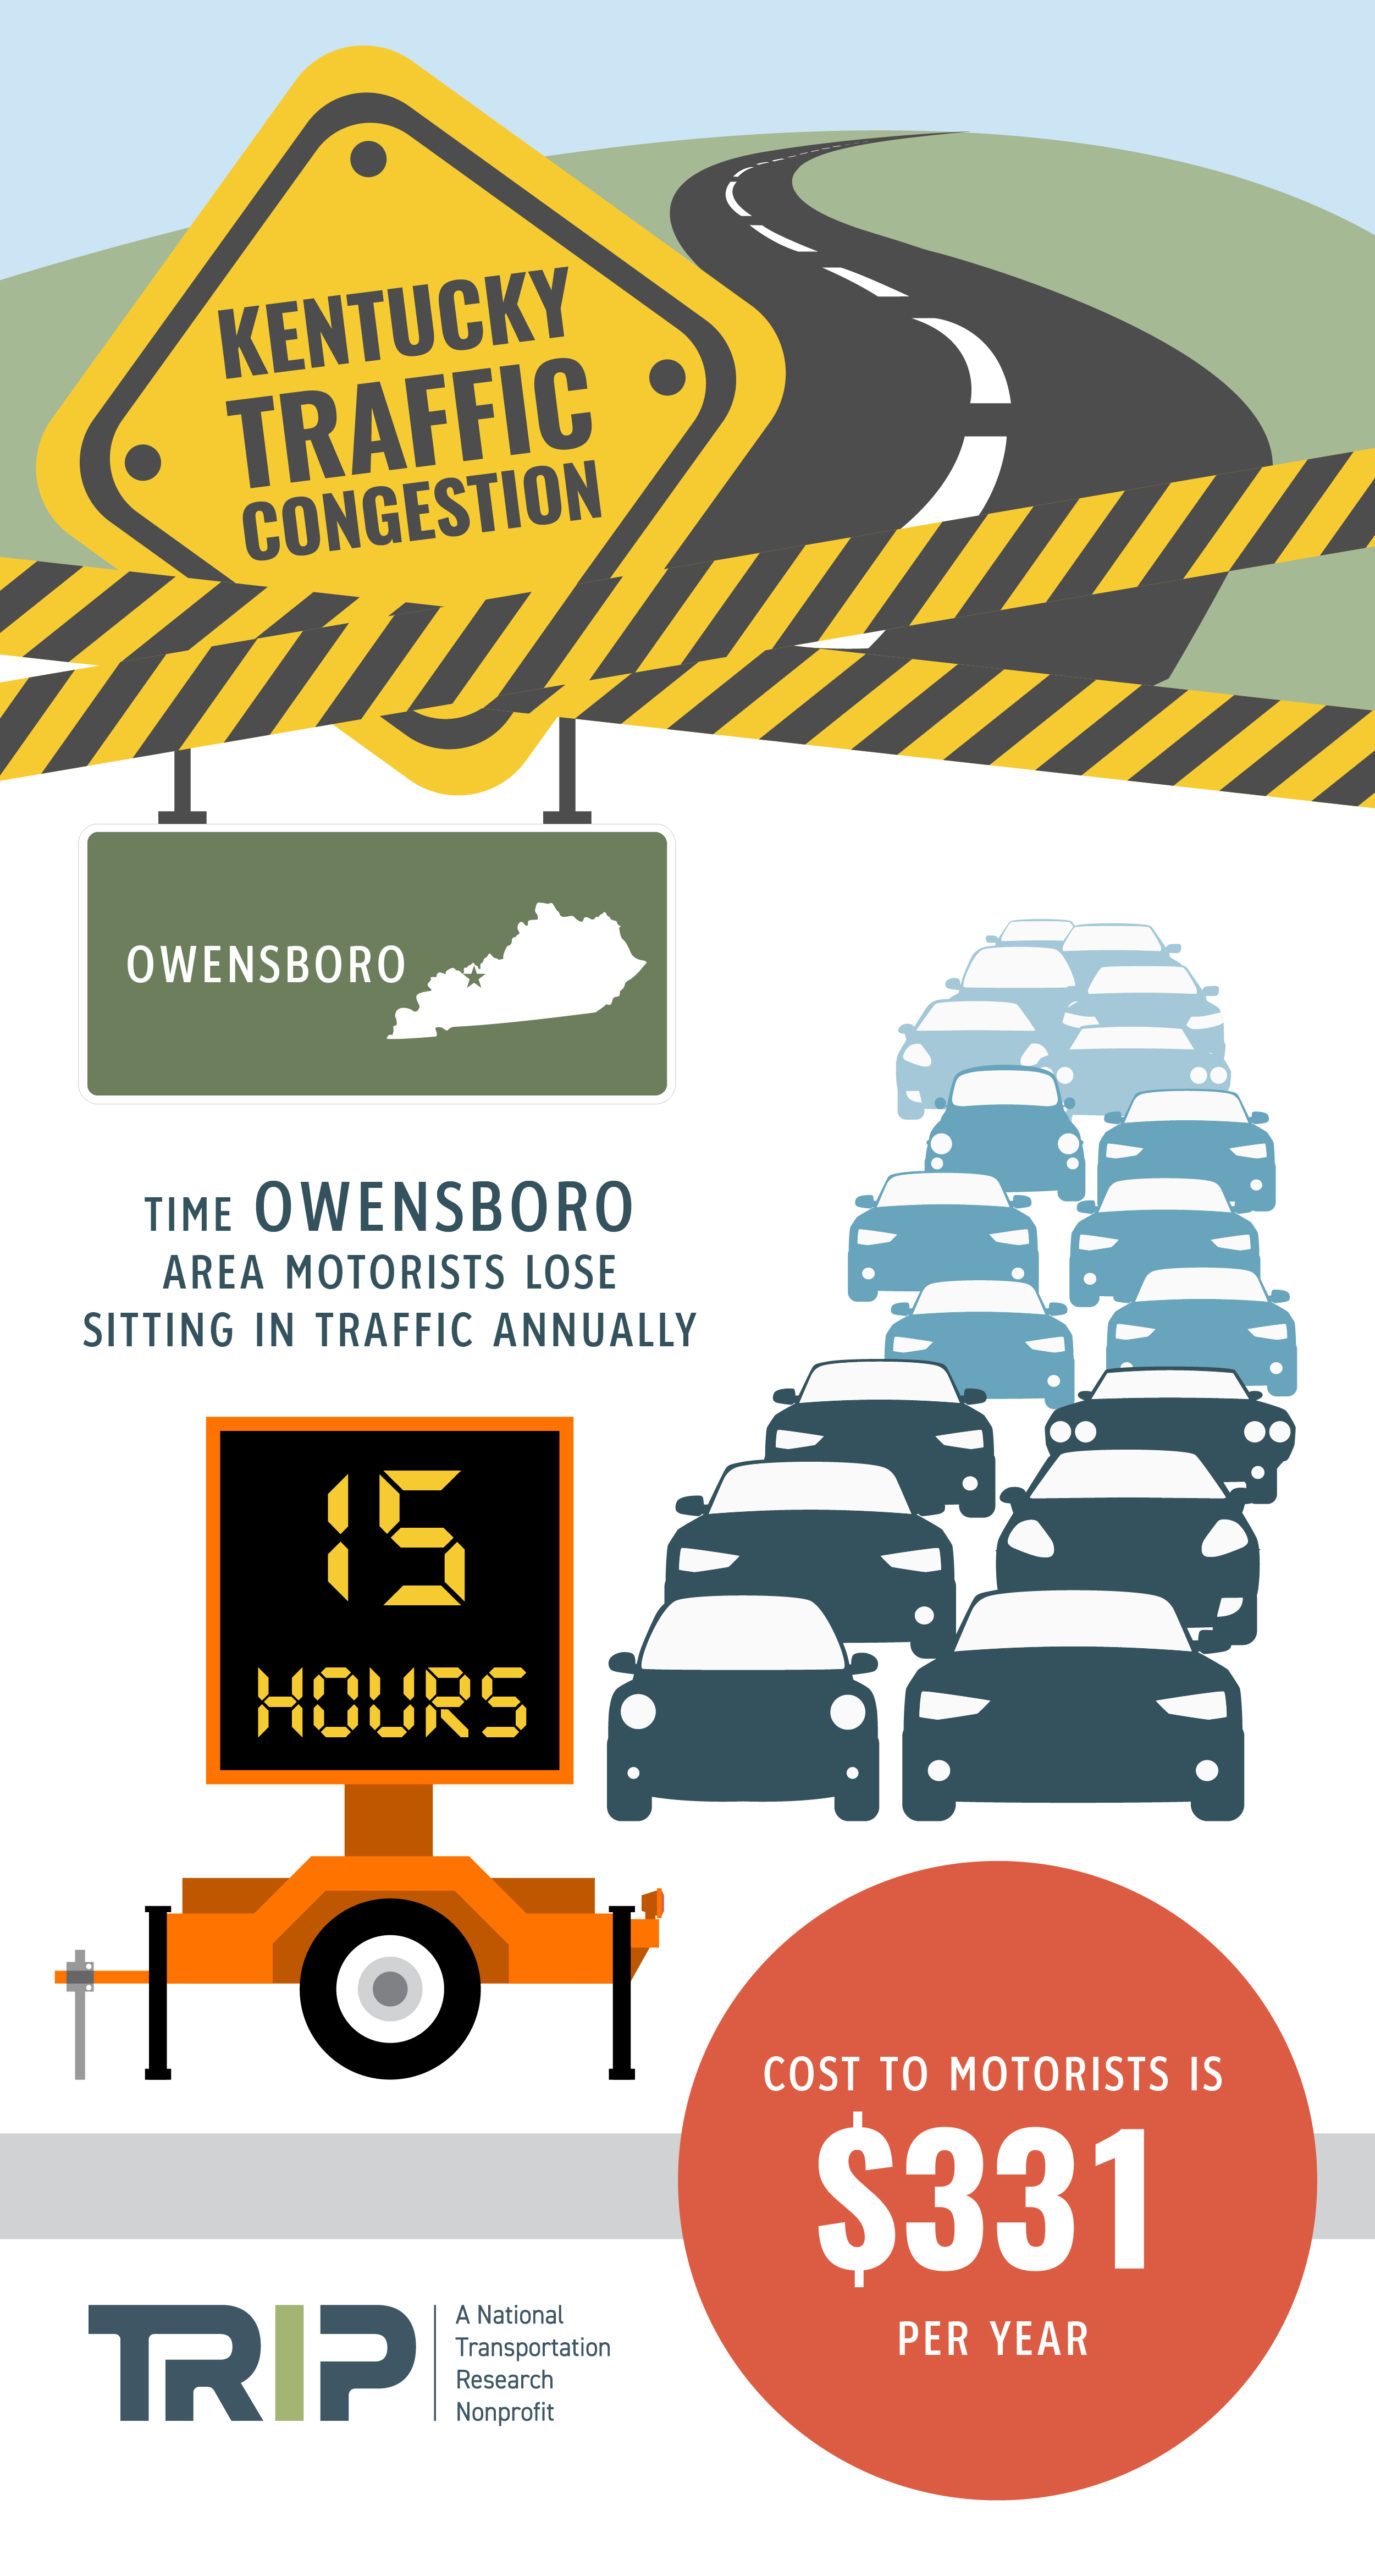 Owensboro Traffic Congestion Infographic – March 2020